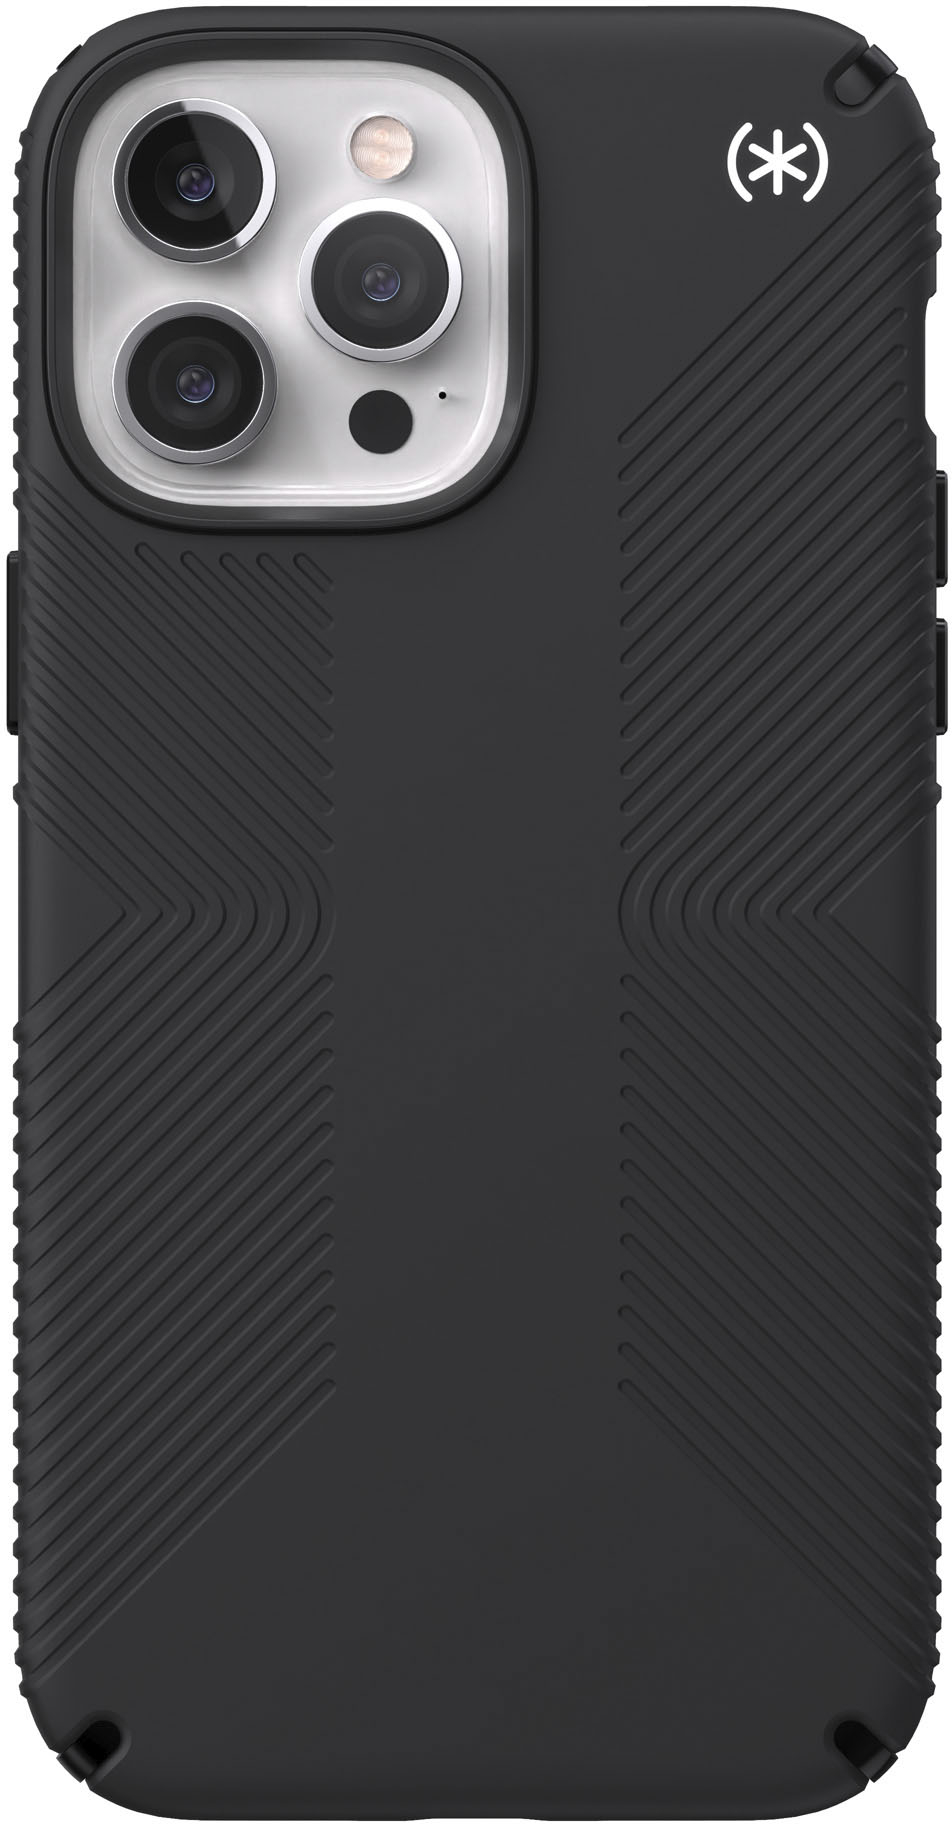 Speck - Presidio2 Grip Hard Shell Case for iPhone 13 Pro Max & iPhone 12 Pro Max - Black